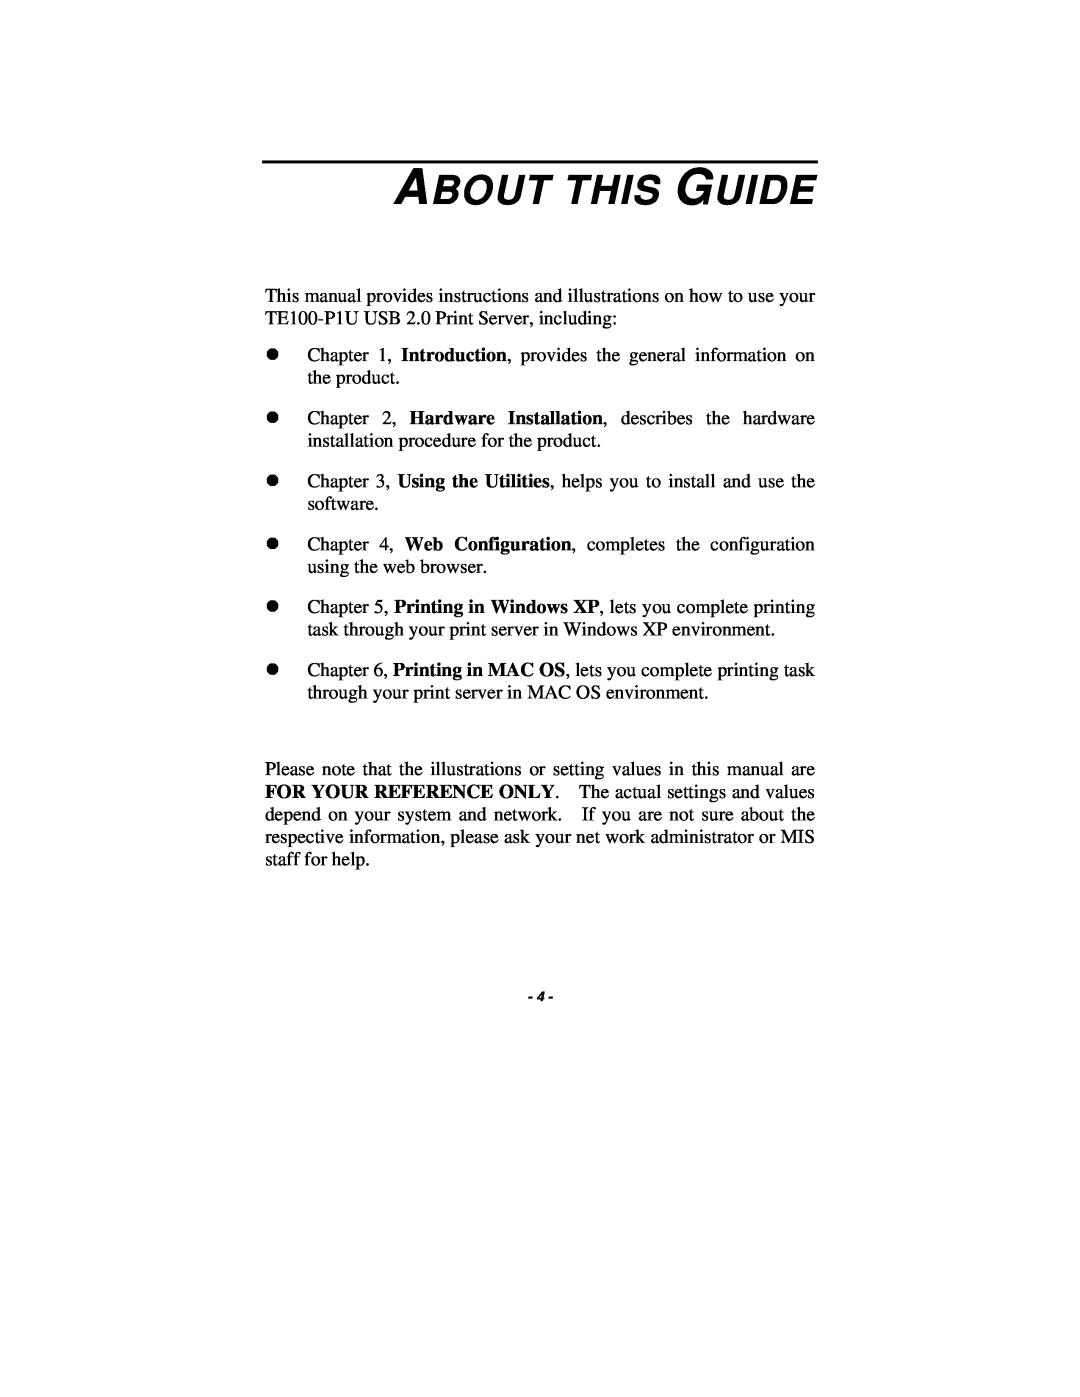 TRENDnet TE100-P1U manual About This Guide 